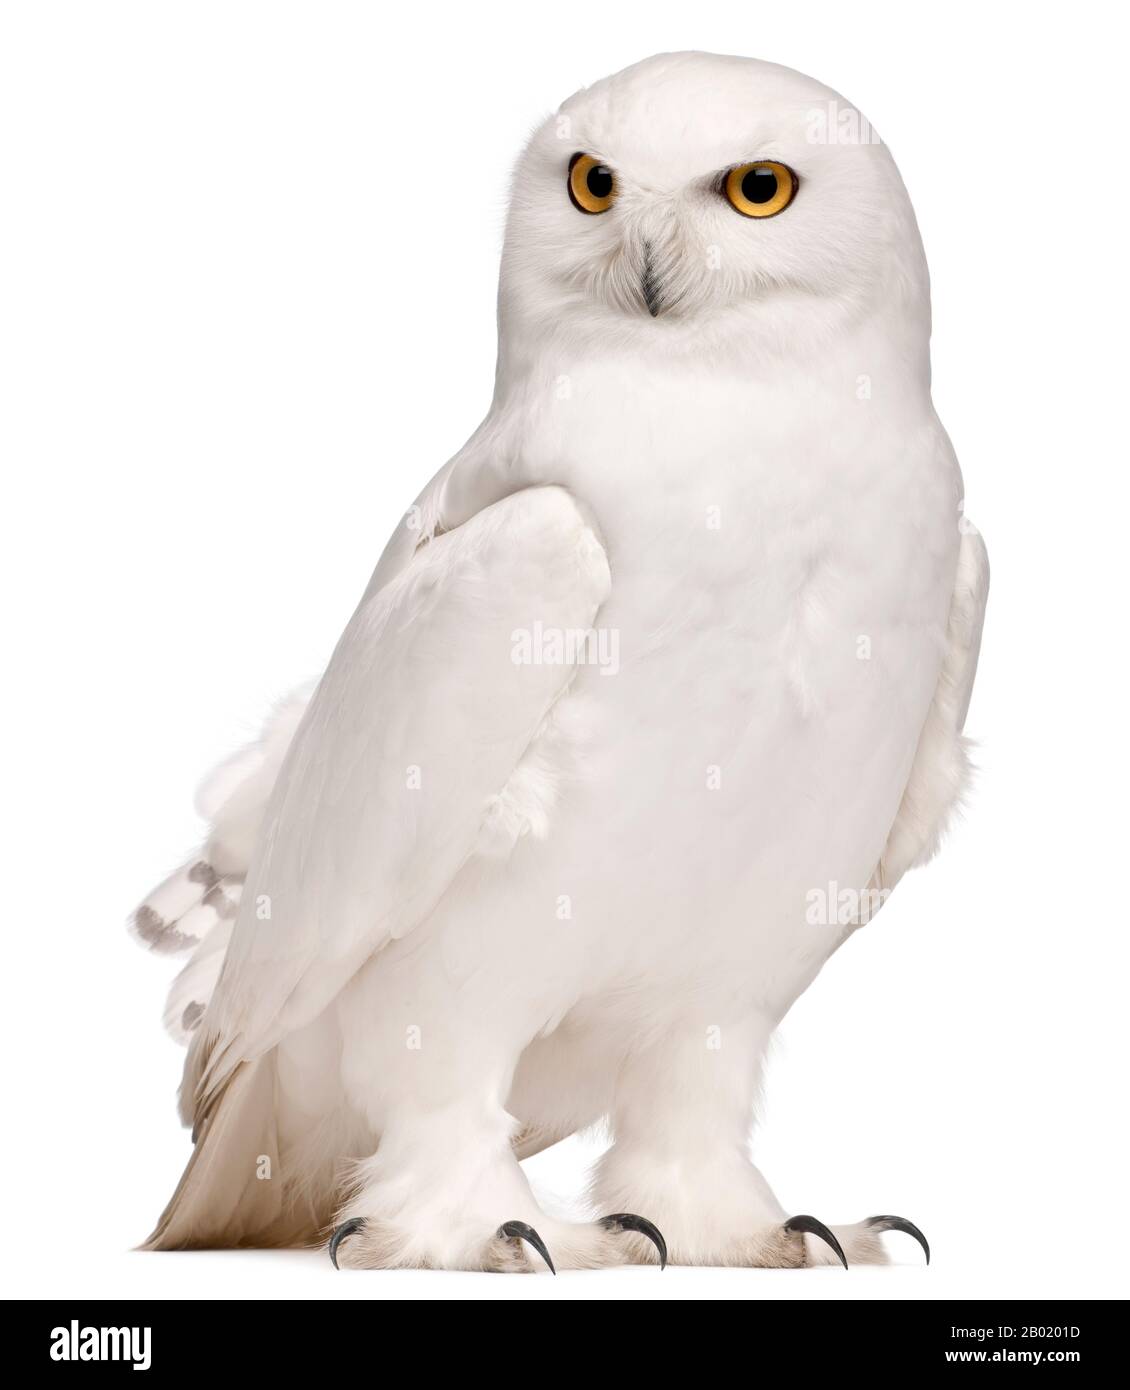 Male Snowy Owl, Bubo scandiacus, 8 years old, in front of white background Stock Photo